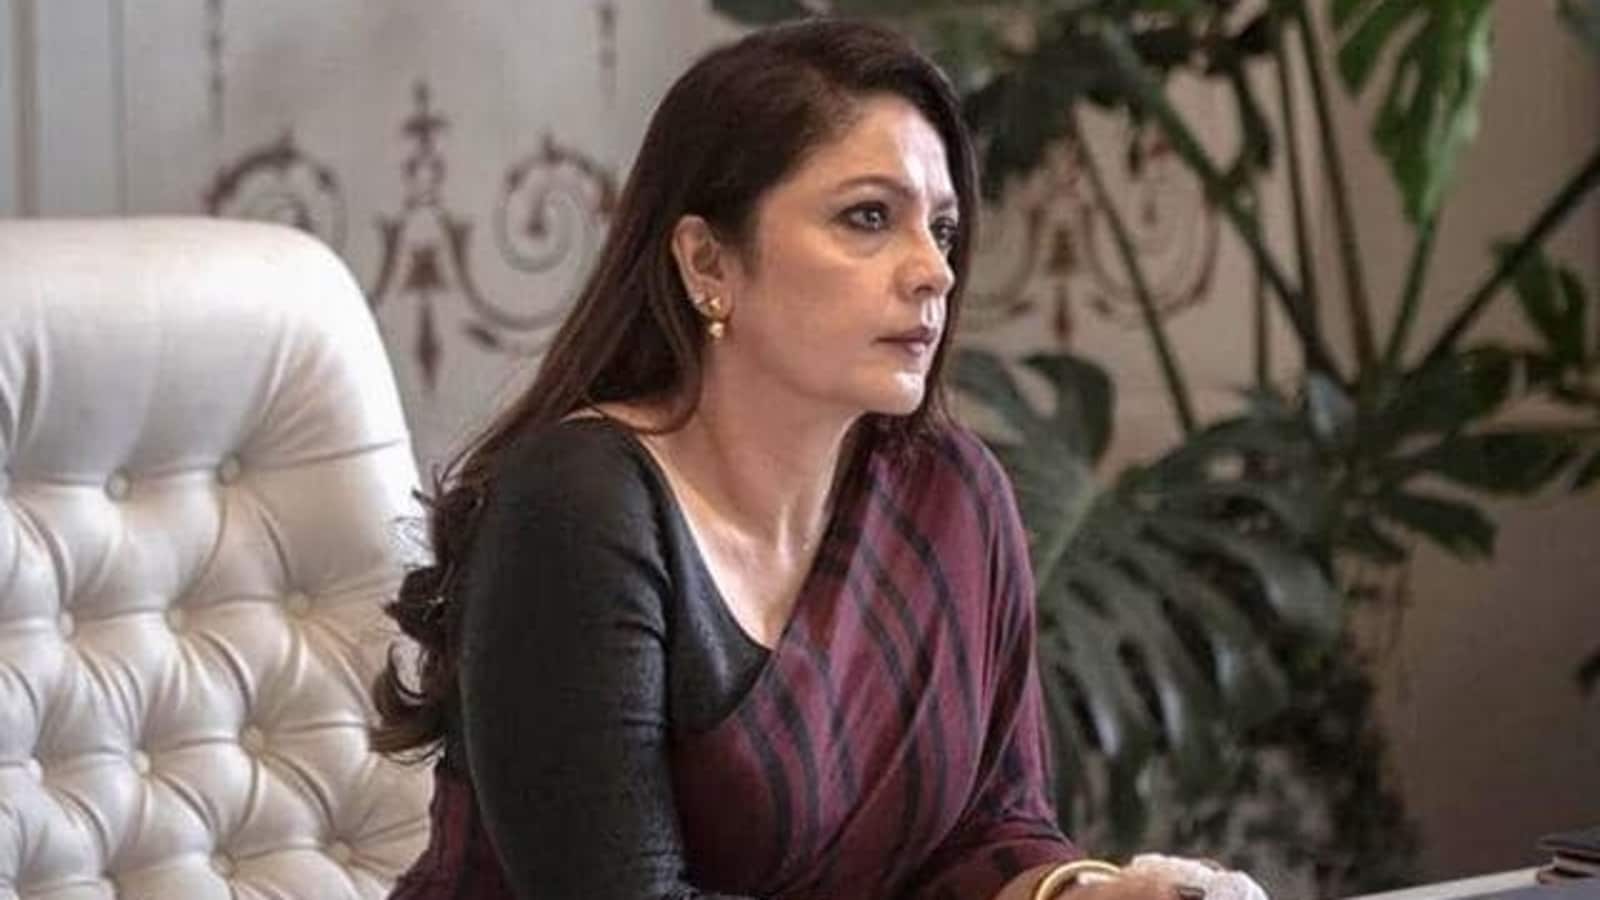 Pooja Bhatt says fixing potholes is more important than talking about seatbelt